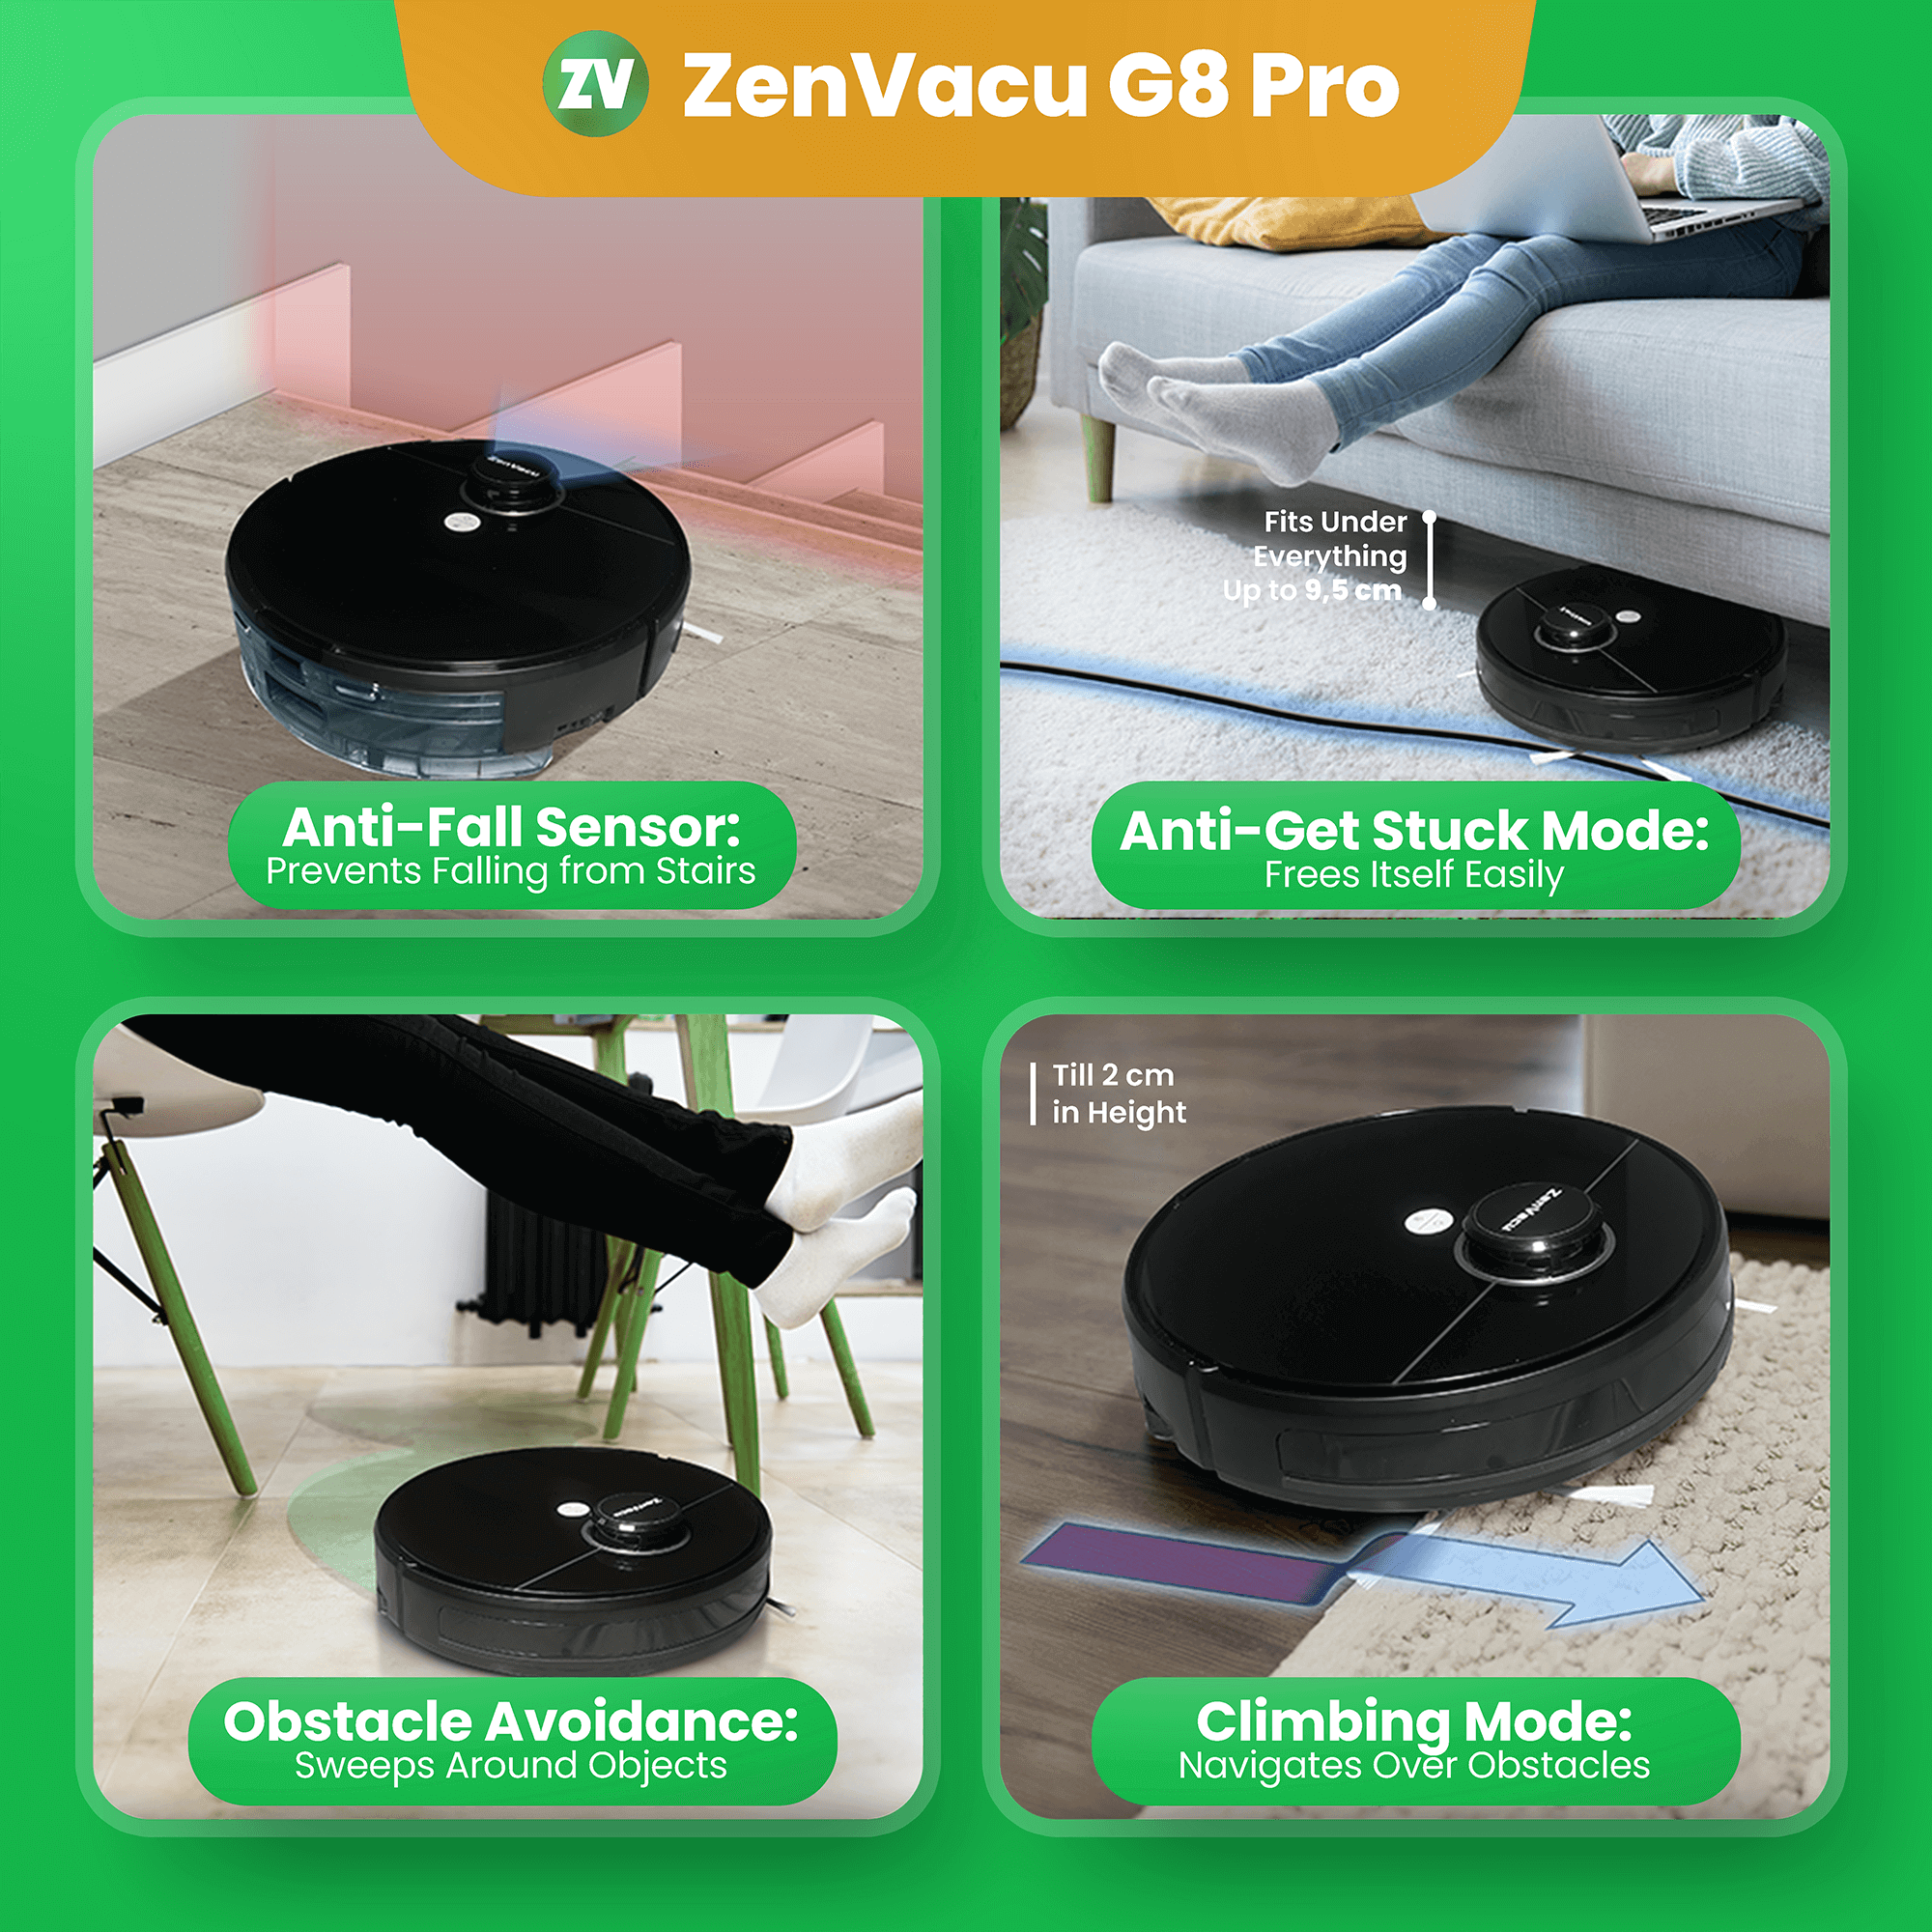 ZenVacu G8 Pro: Advanced Safety Systems, Anti-Fall Sensor, Anti-Stuck Mode, Obstacle Avoidance, and Climbing Mode for Seamless Performance. Ensure the safety and efficiency of your home cleaning with these cutting-edge features.